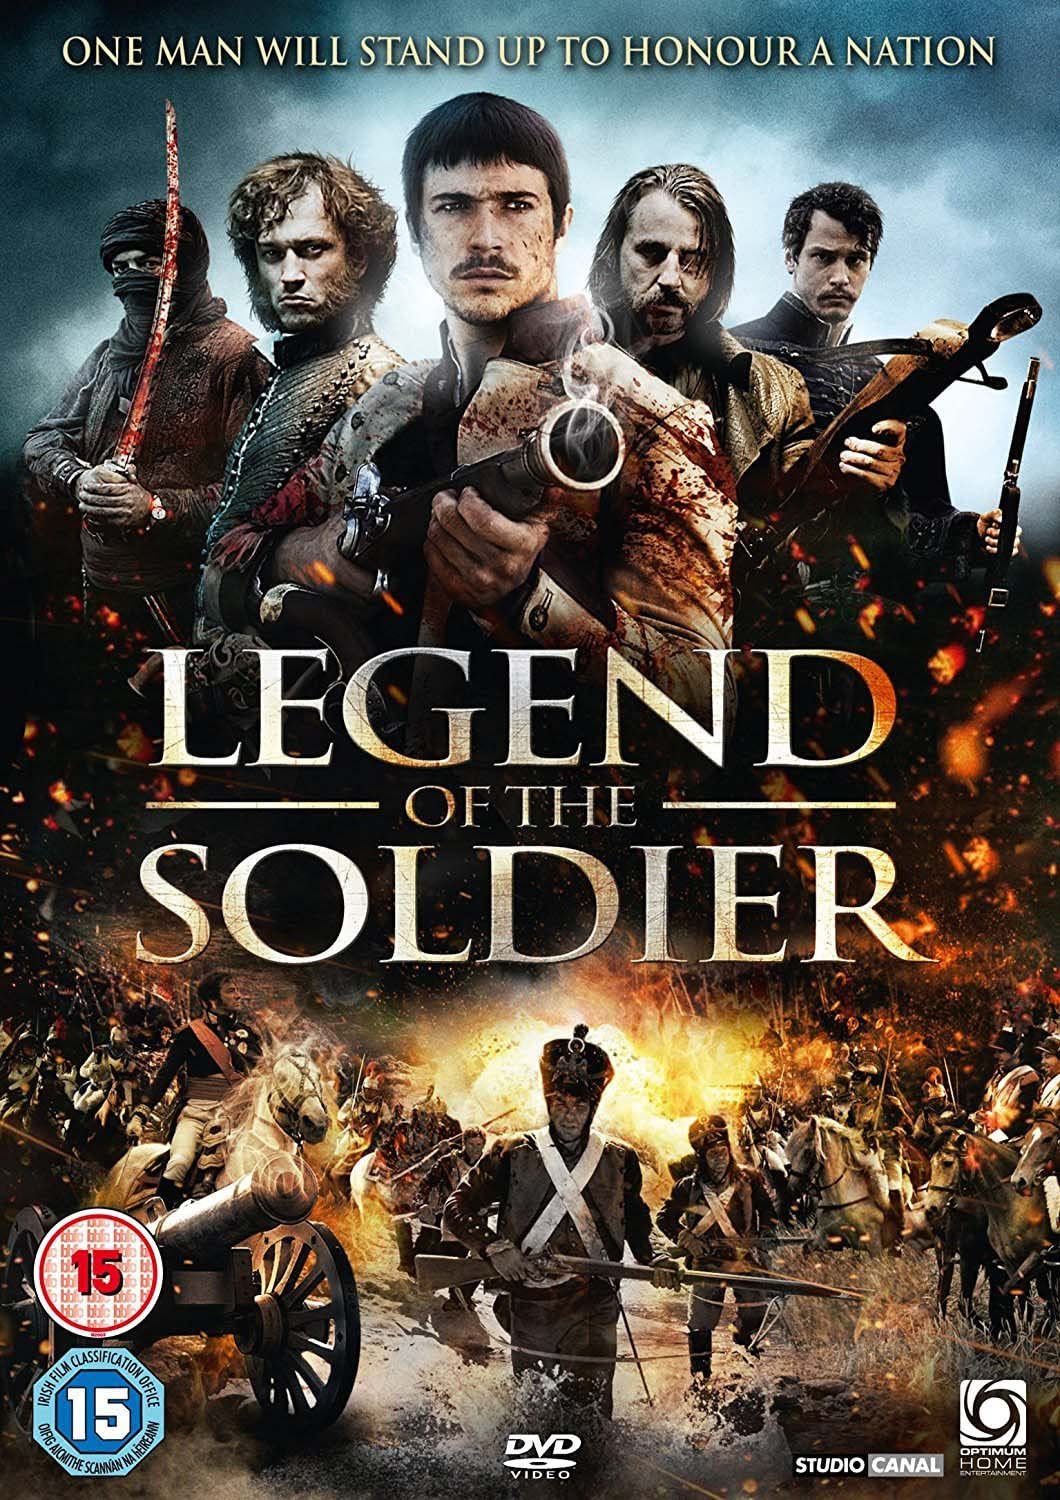 Legend of the Soldier (a.k.a. Bruc, the Manhunt) [2010] - History/Adventure [DVD]